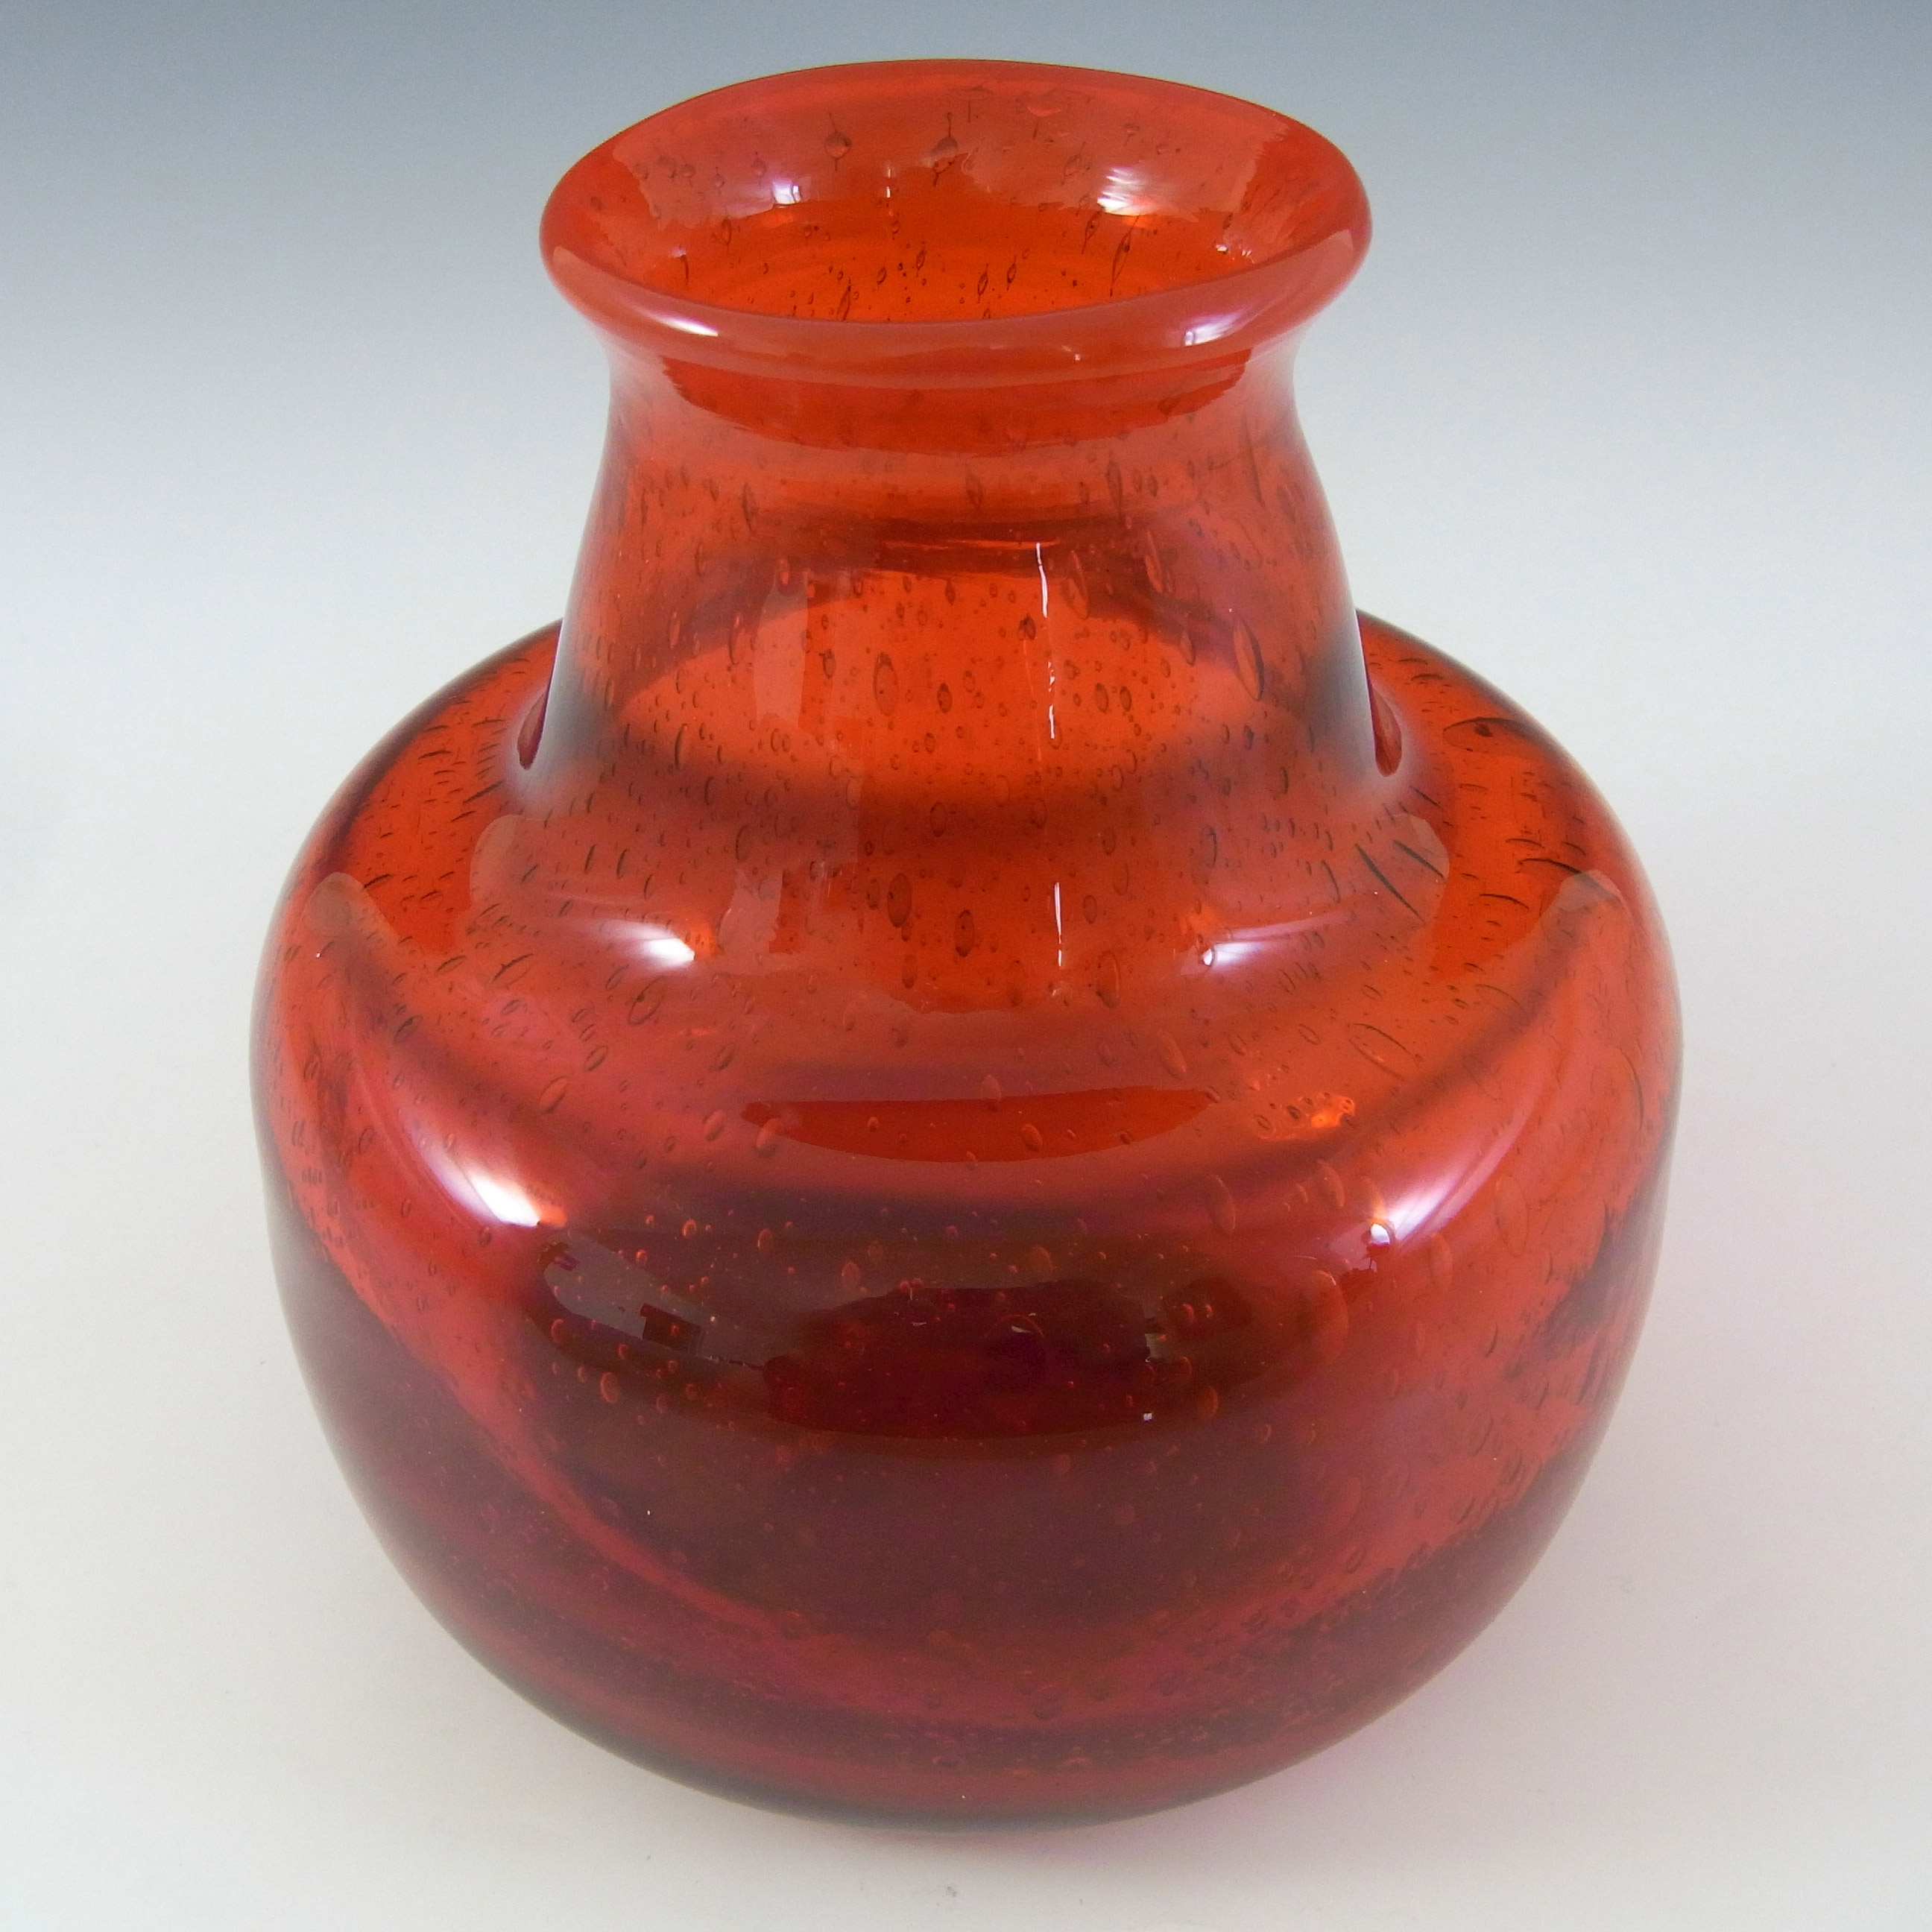 SIGNED Kosta Boda Bubbly Red Glass Vase by Erik Hoglund - Click Image to Close